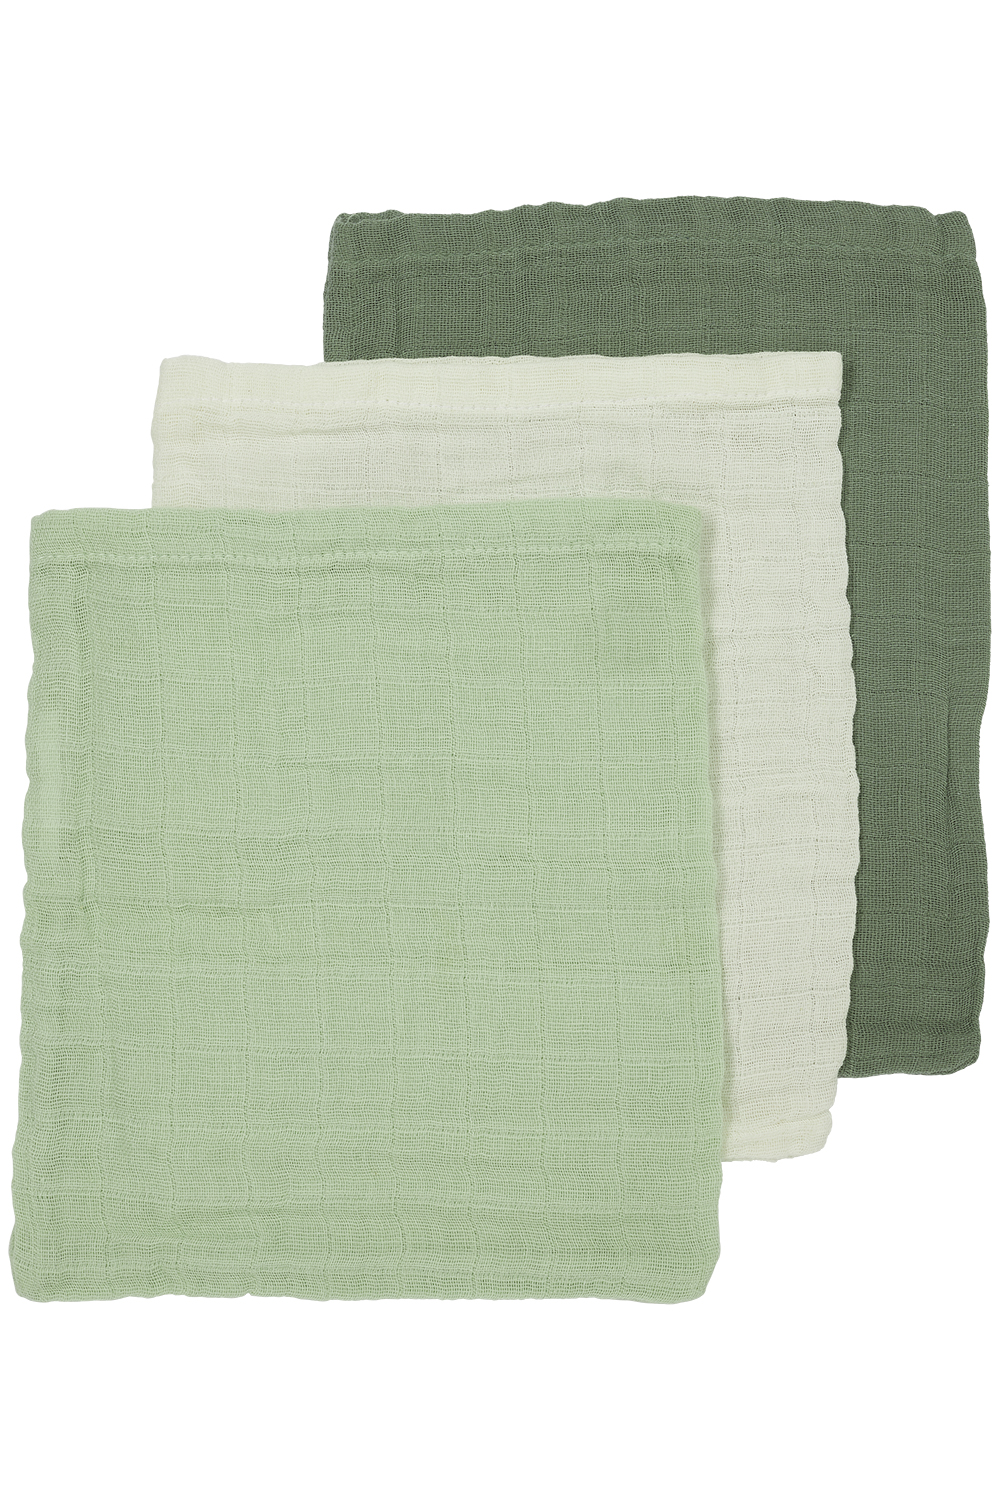 Waschhandschuhe 3er pack pre-washed musselin Uni - offwhite/soft green/forest green - 20x17cm